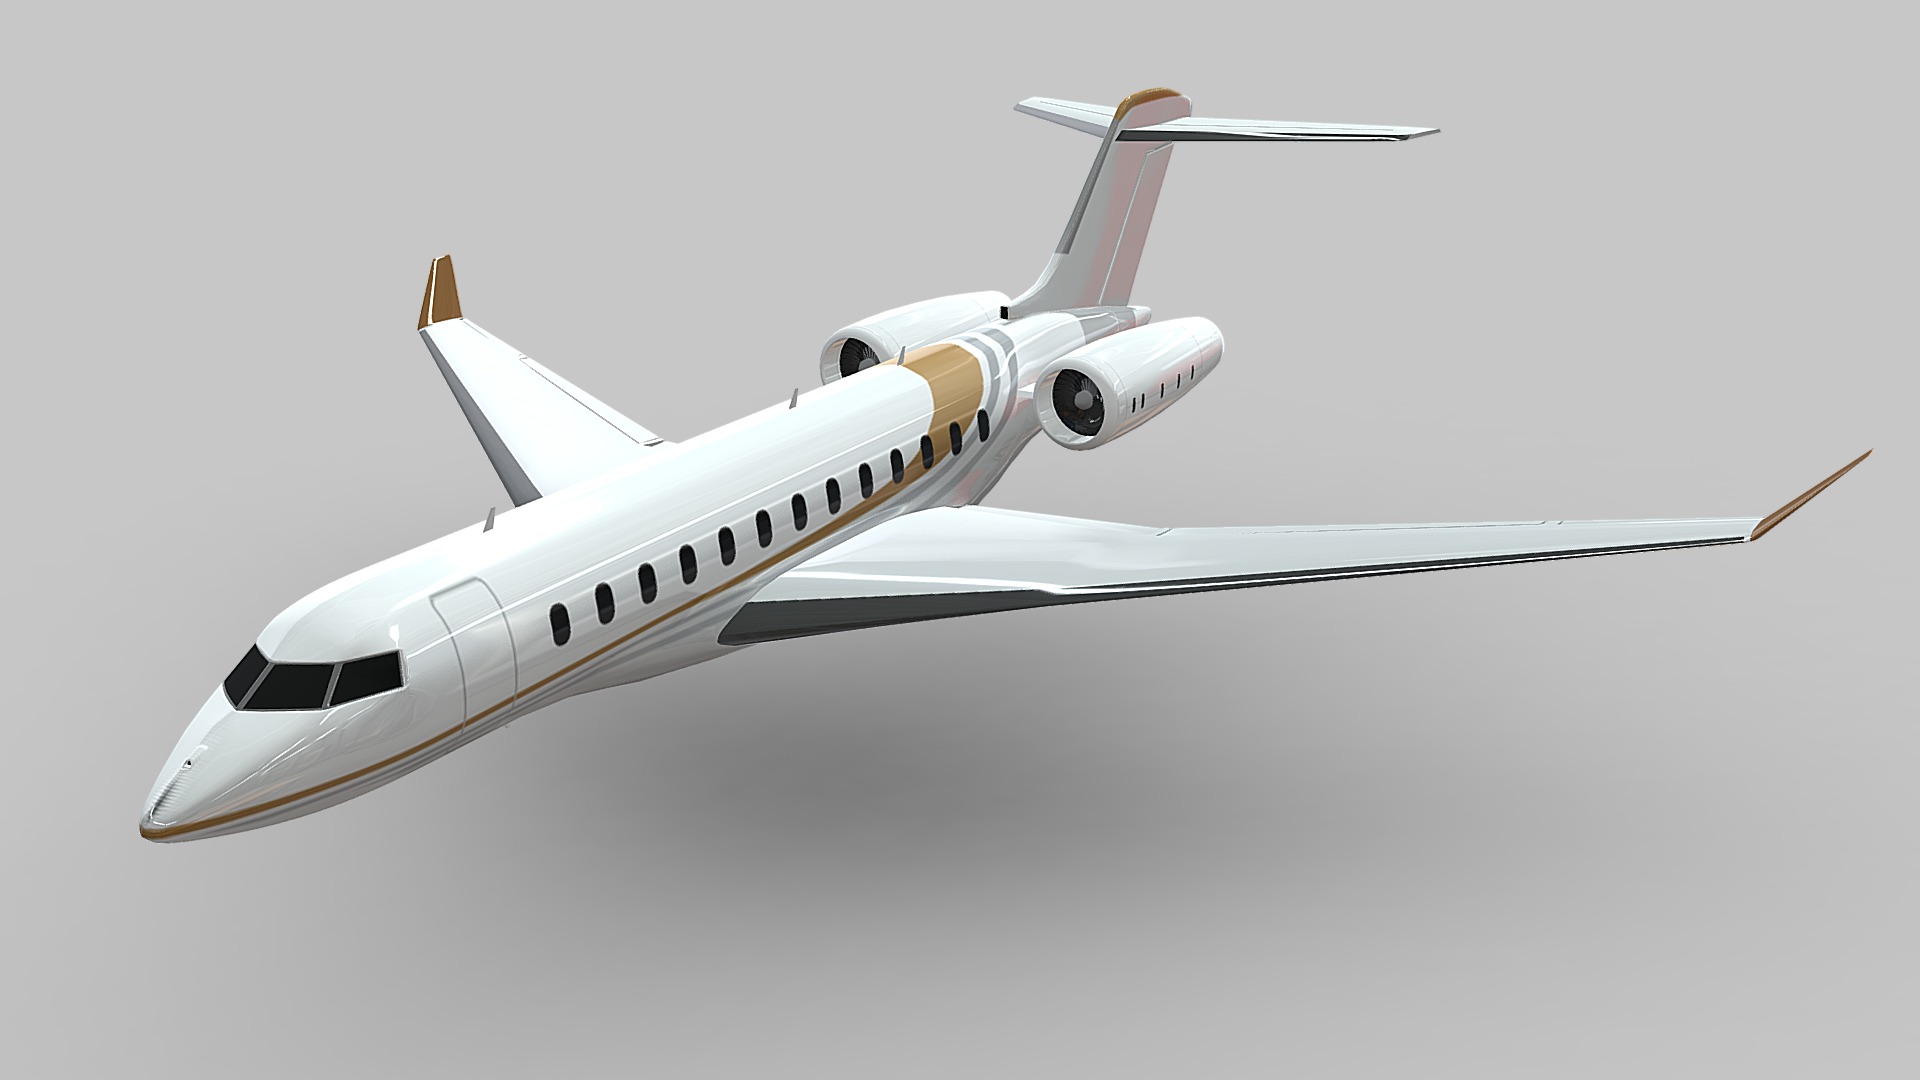 3D model Bombardier 8000 Global lowpoly jet - This is a 3D model of the Bombardier 8000 Global lowpoly jet. The 3D model is about a white airplane in the sky.